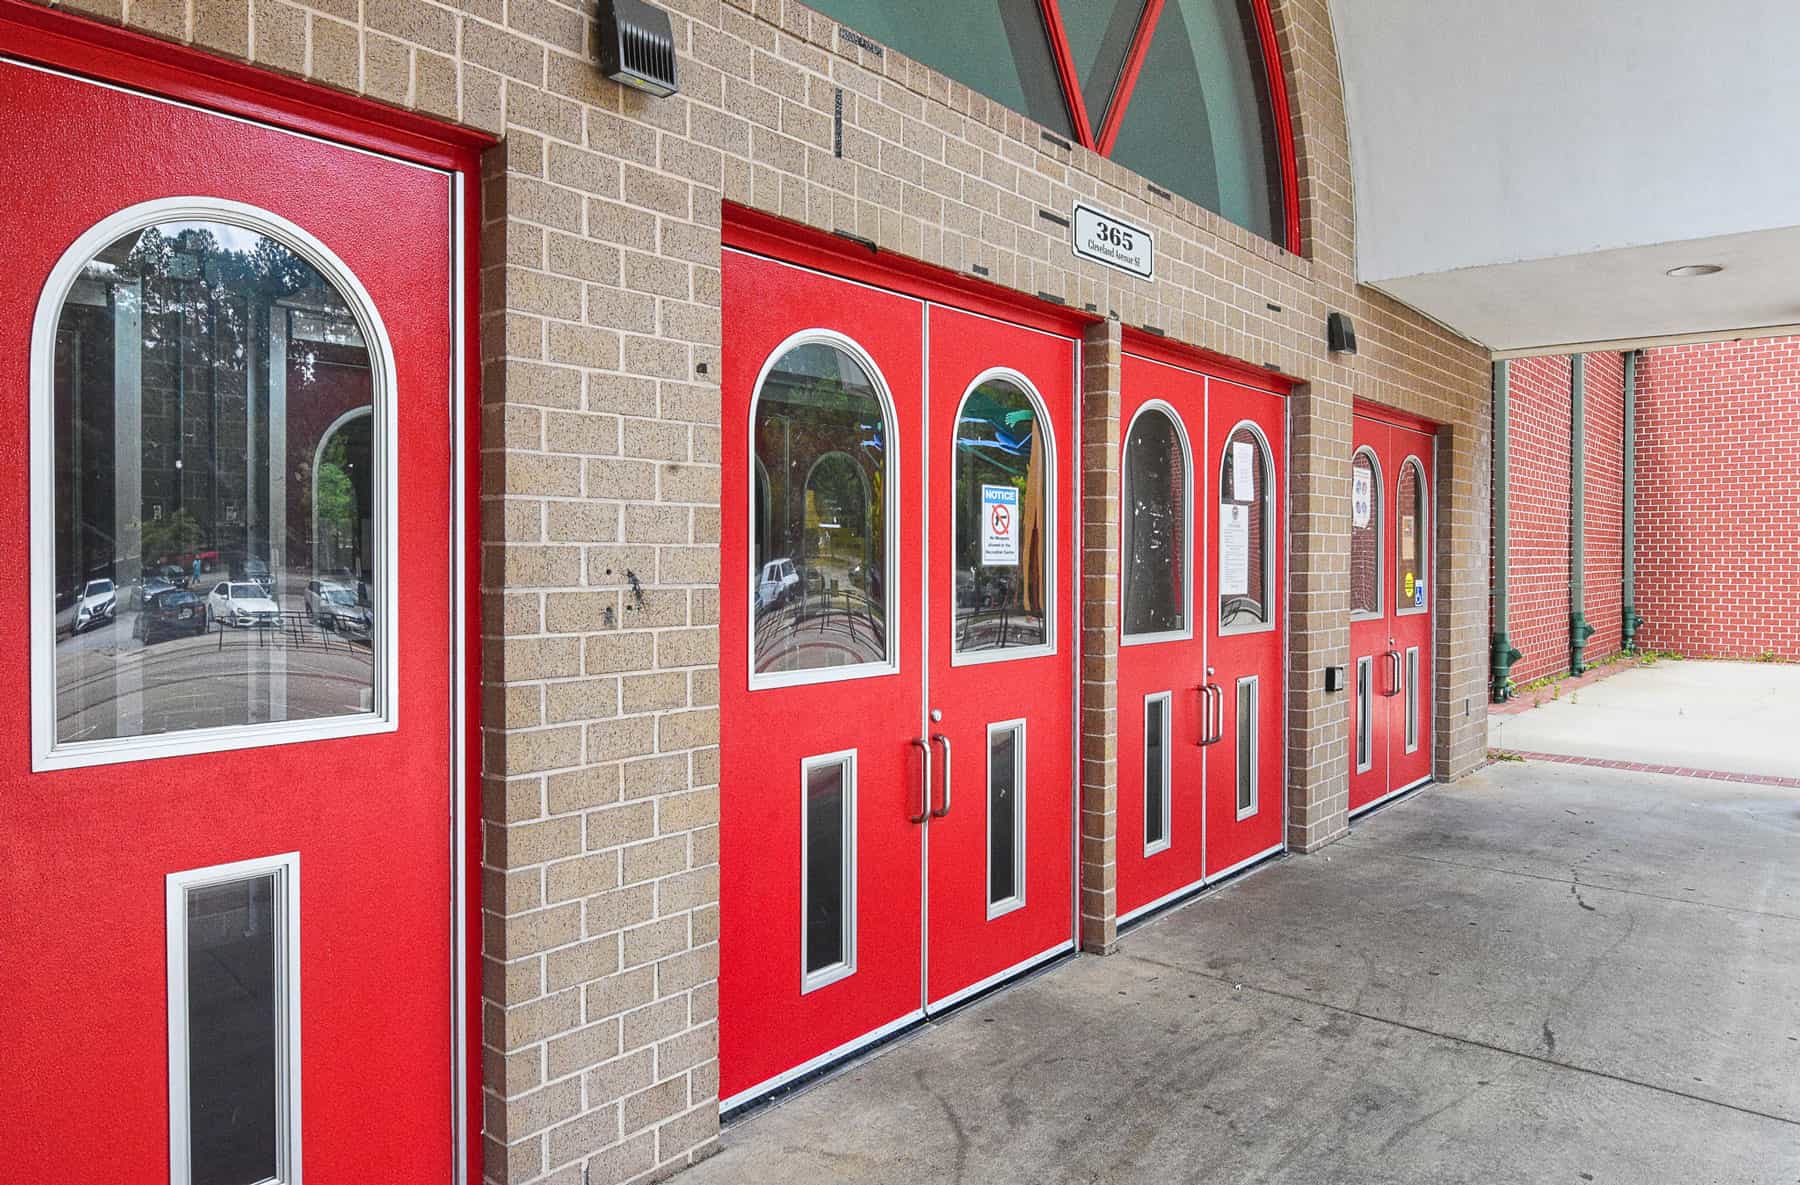 A group of commercial red doors in front of a brick building.